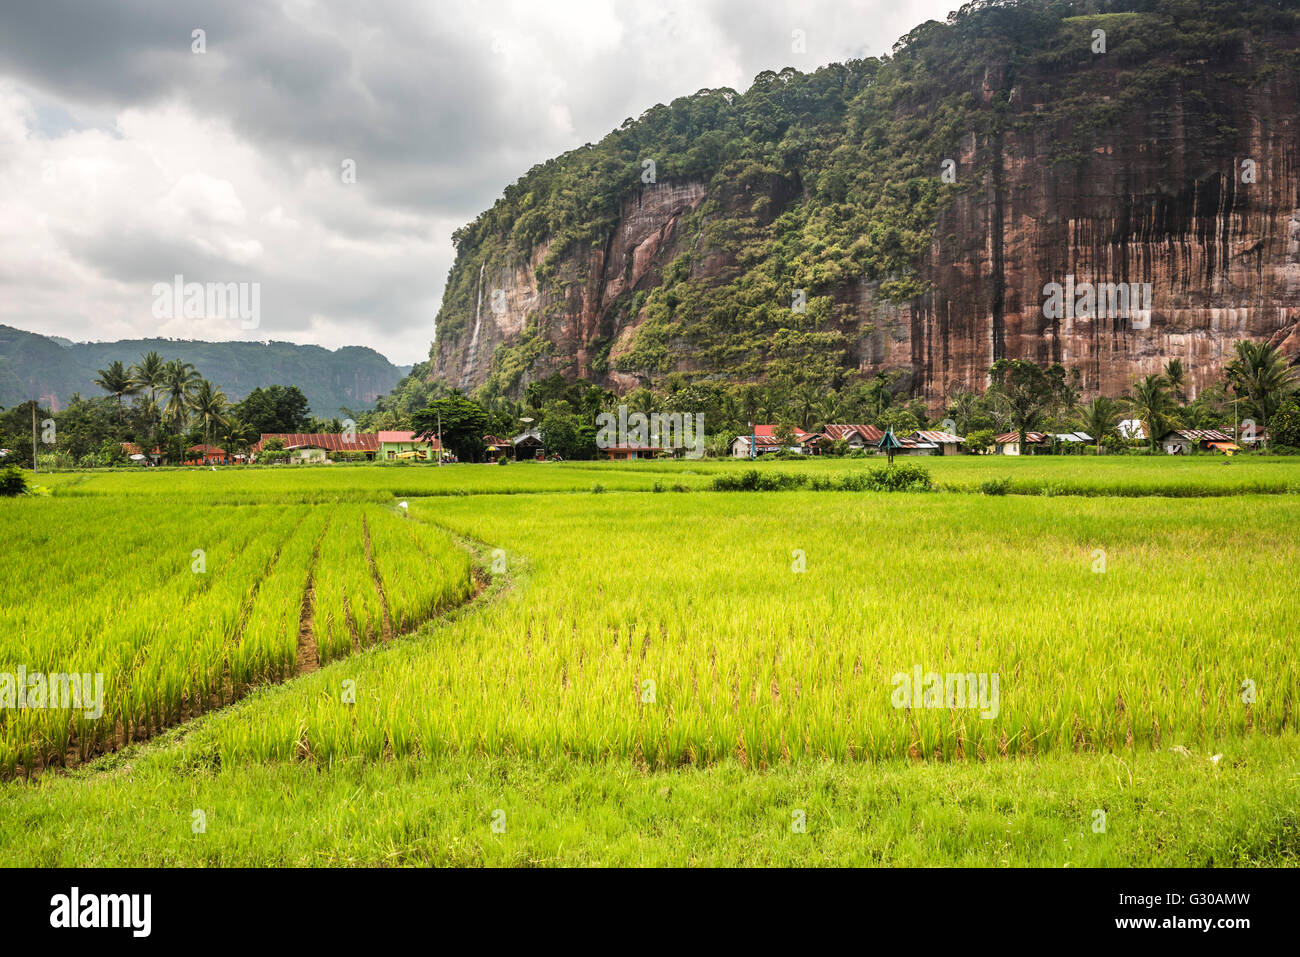 Rice paddy fields and cliffs in the Harau Valley, Bukittinggi, West Sumatra, Indonesia, Southeast Asia, Asia Stock Photo